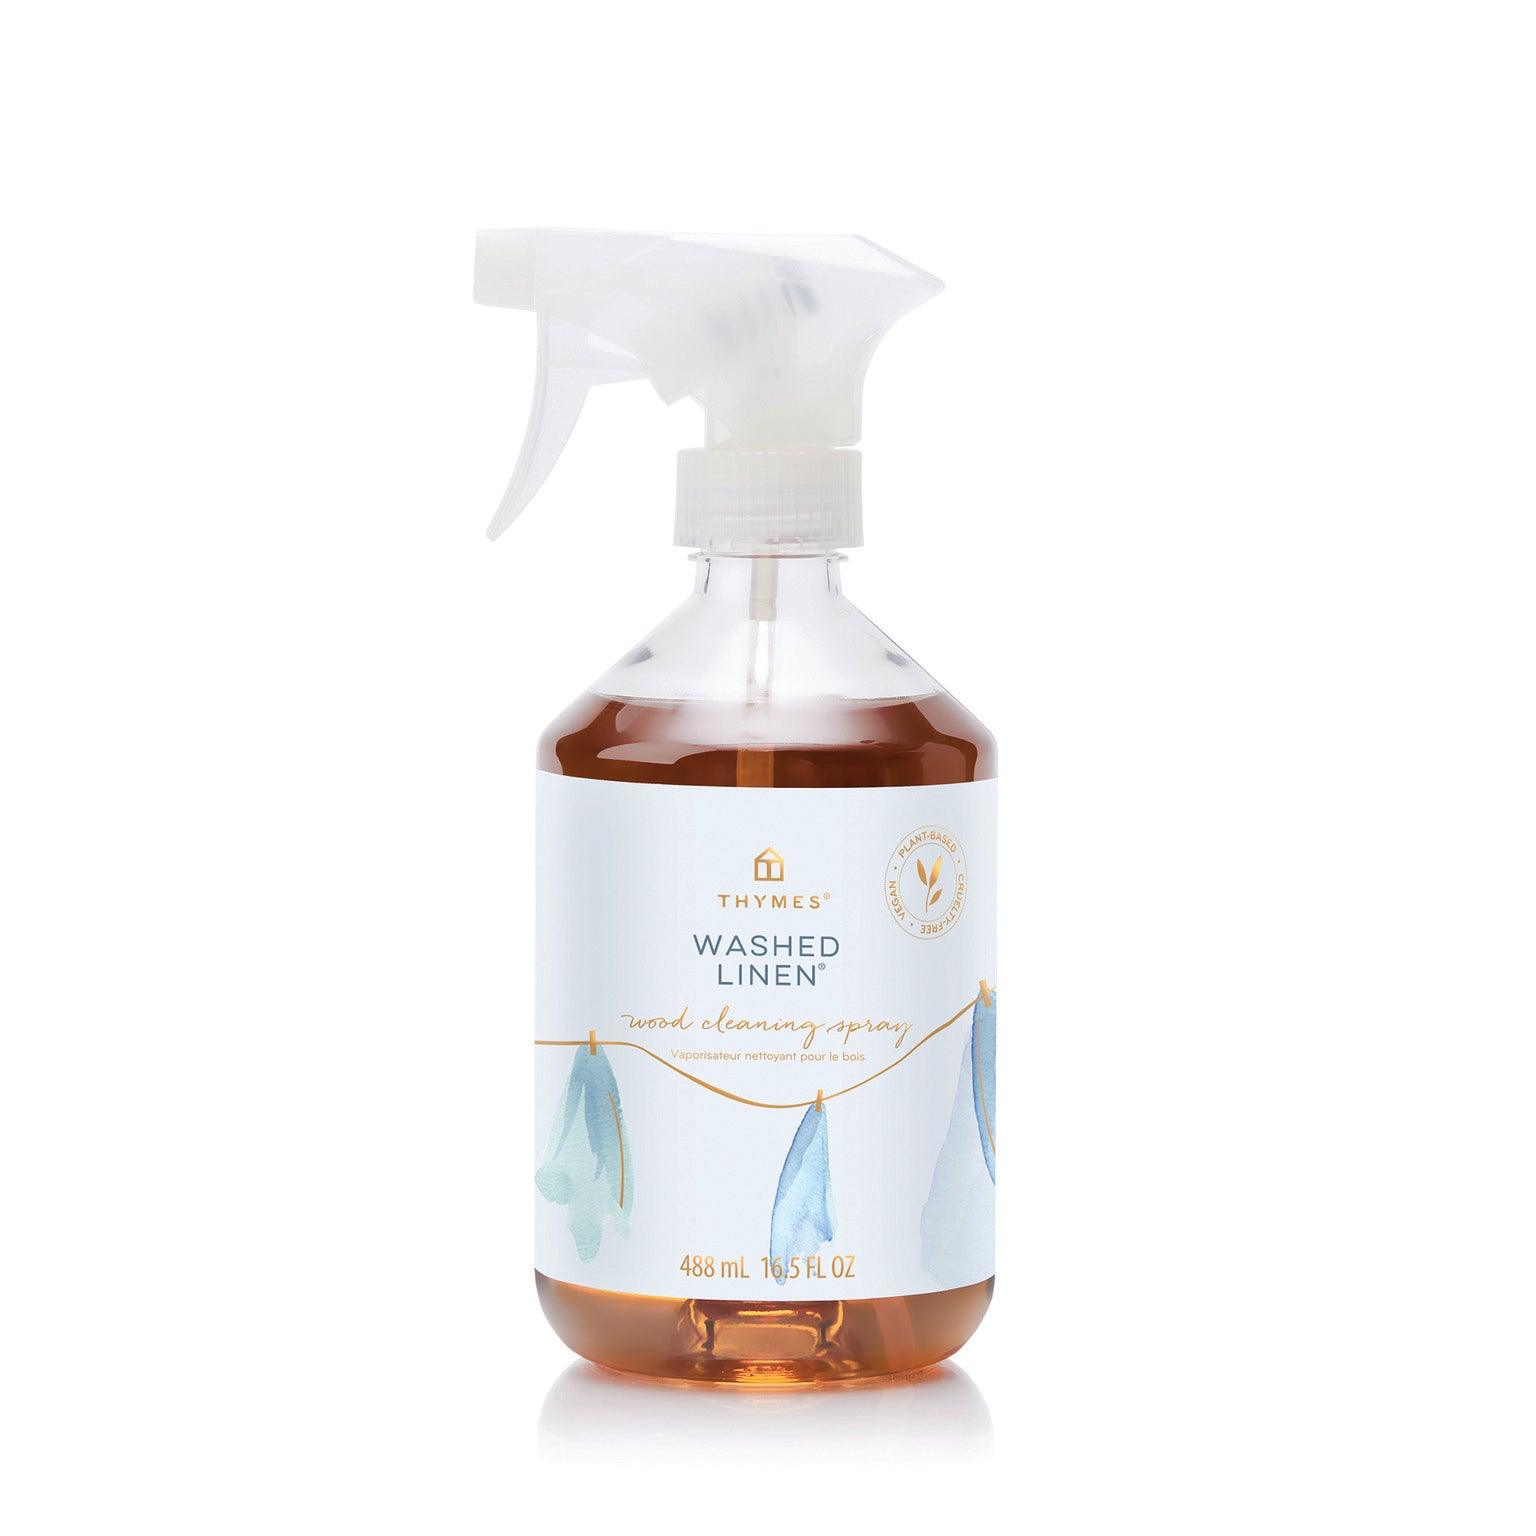 Thymes Washed Linen Wood Cleaning Spray